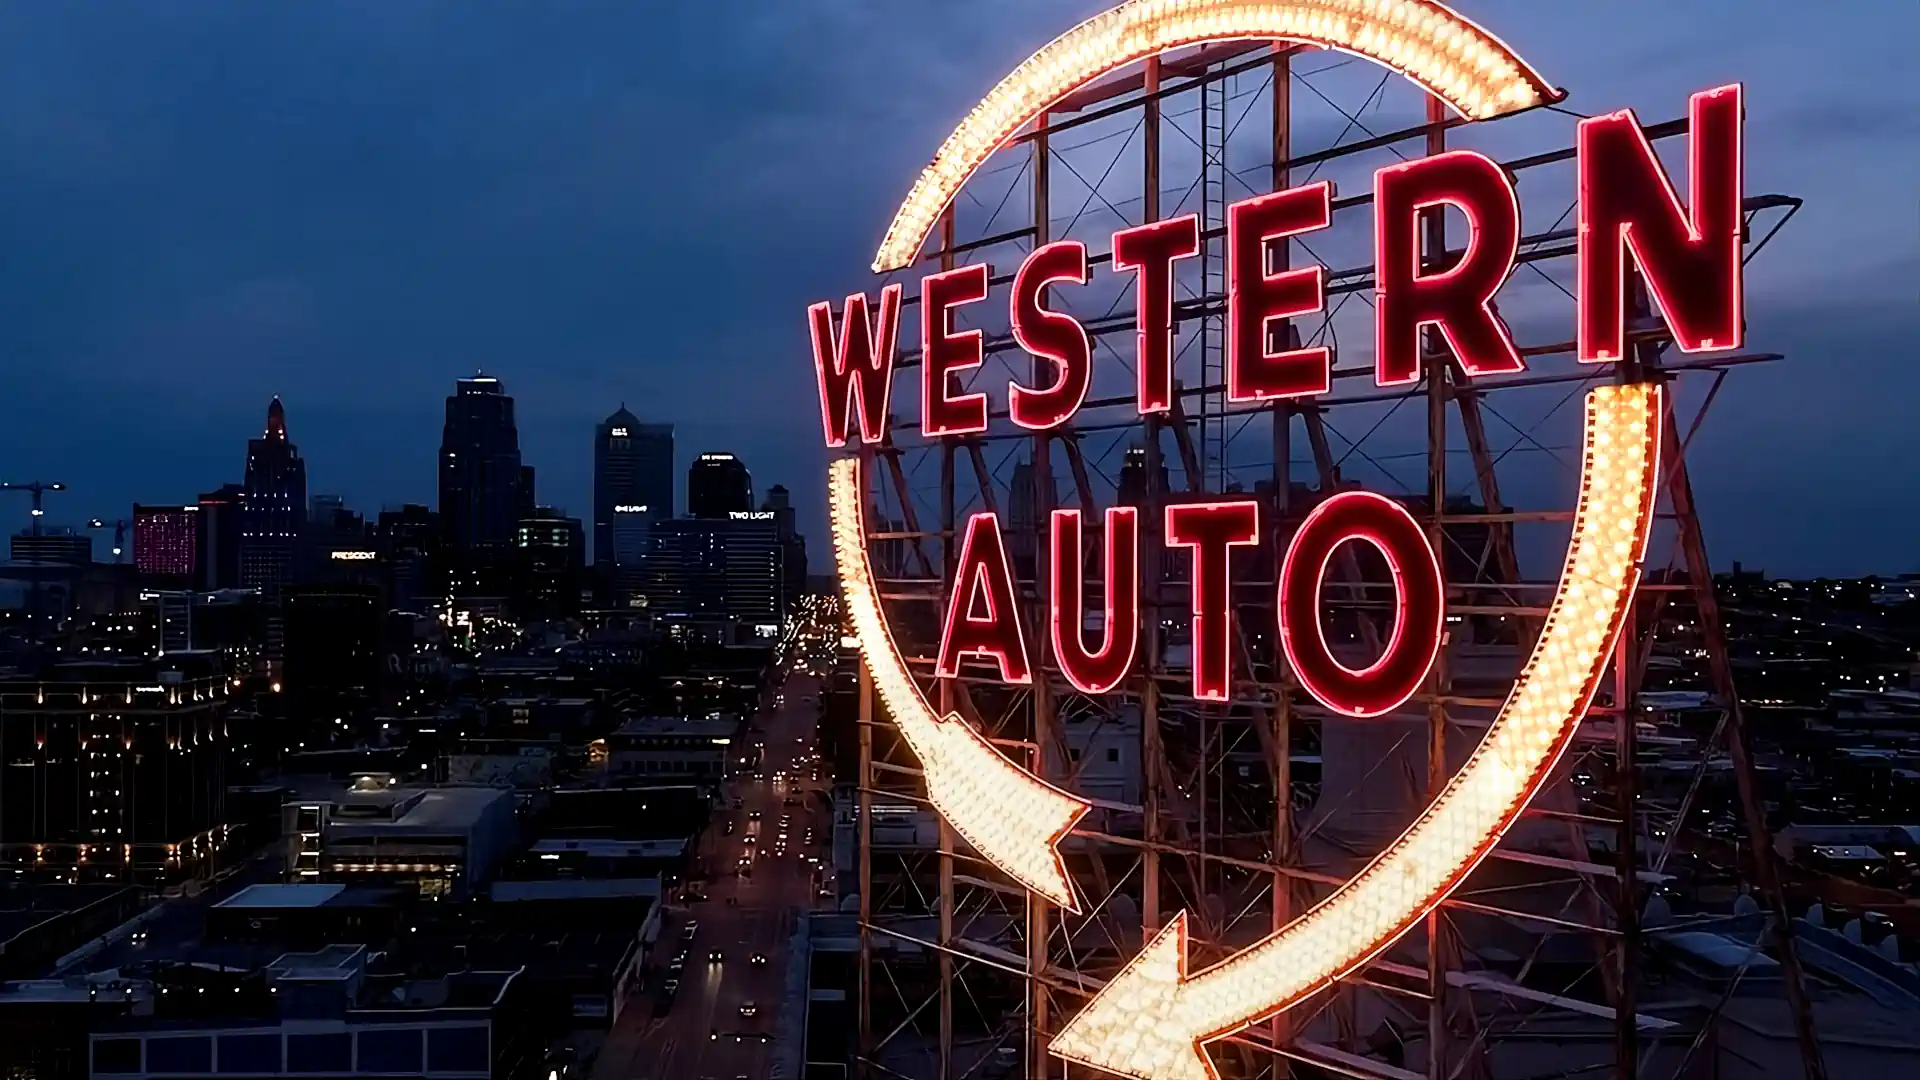 Aerial drone shot of Kansas City featuring the Western Auto sign